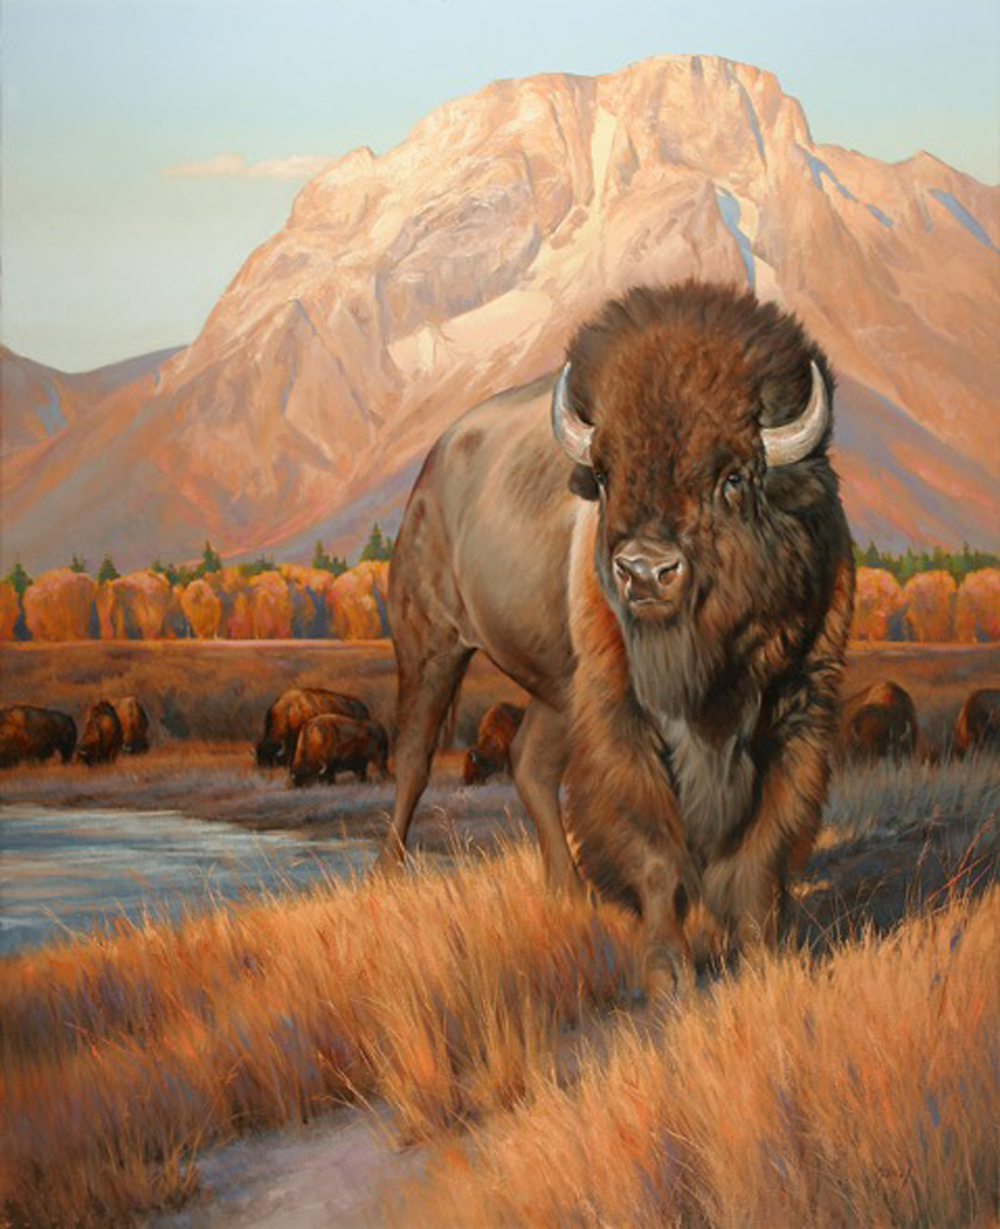 “Greeting the Dawn” by Edward Aldrich is the featured artwork for the Jackson Hole Fall Arts Festival and appears on labels for the event’s signature wines as well as the 2016 festival poster.